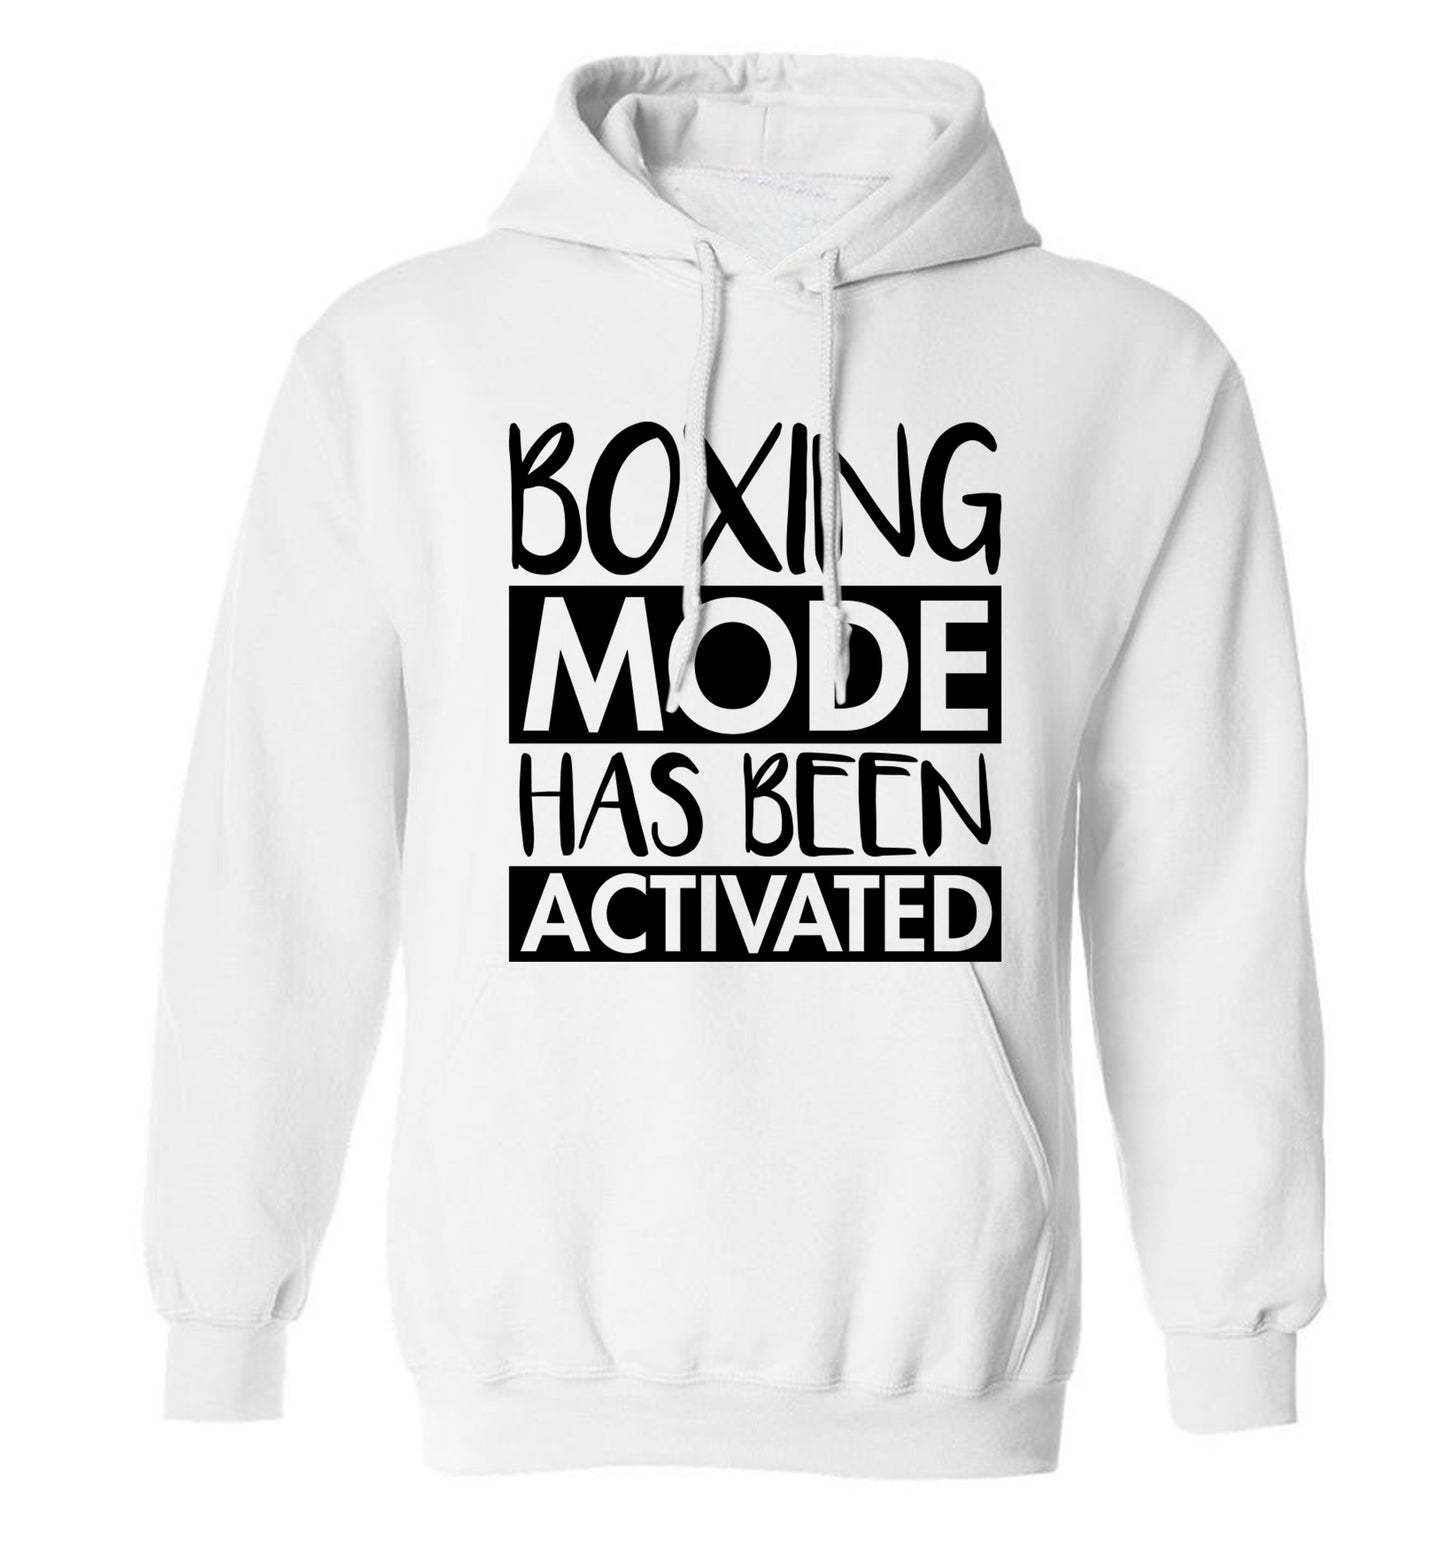 Boxing mode activated adults unisex white hoodie 2XL